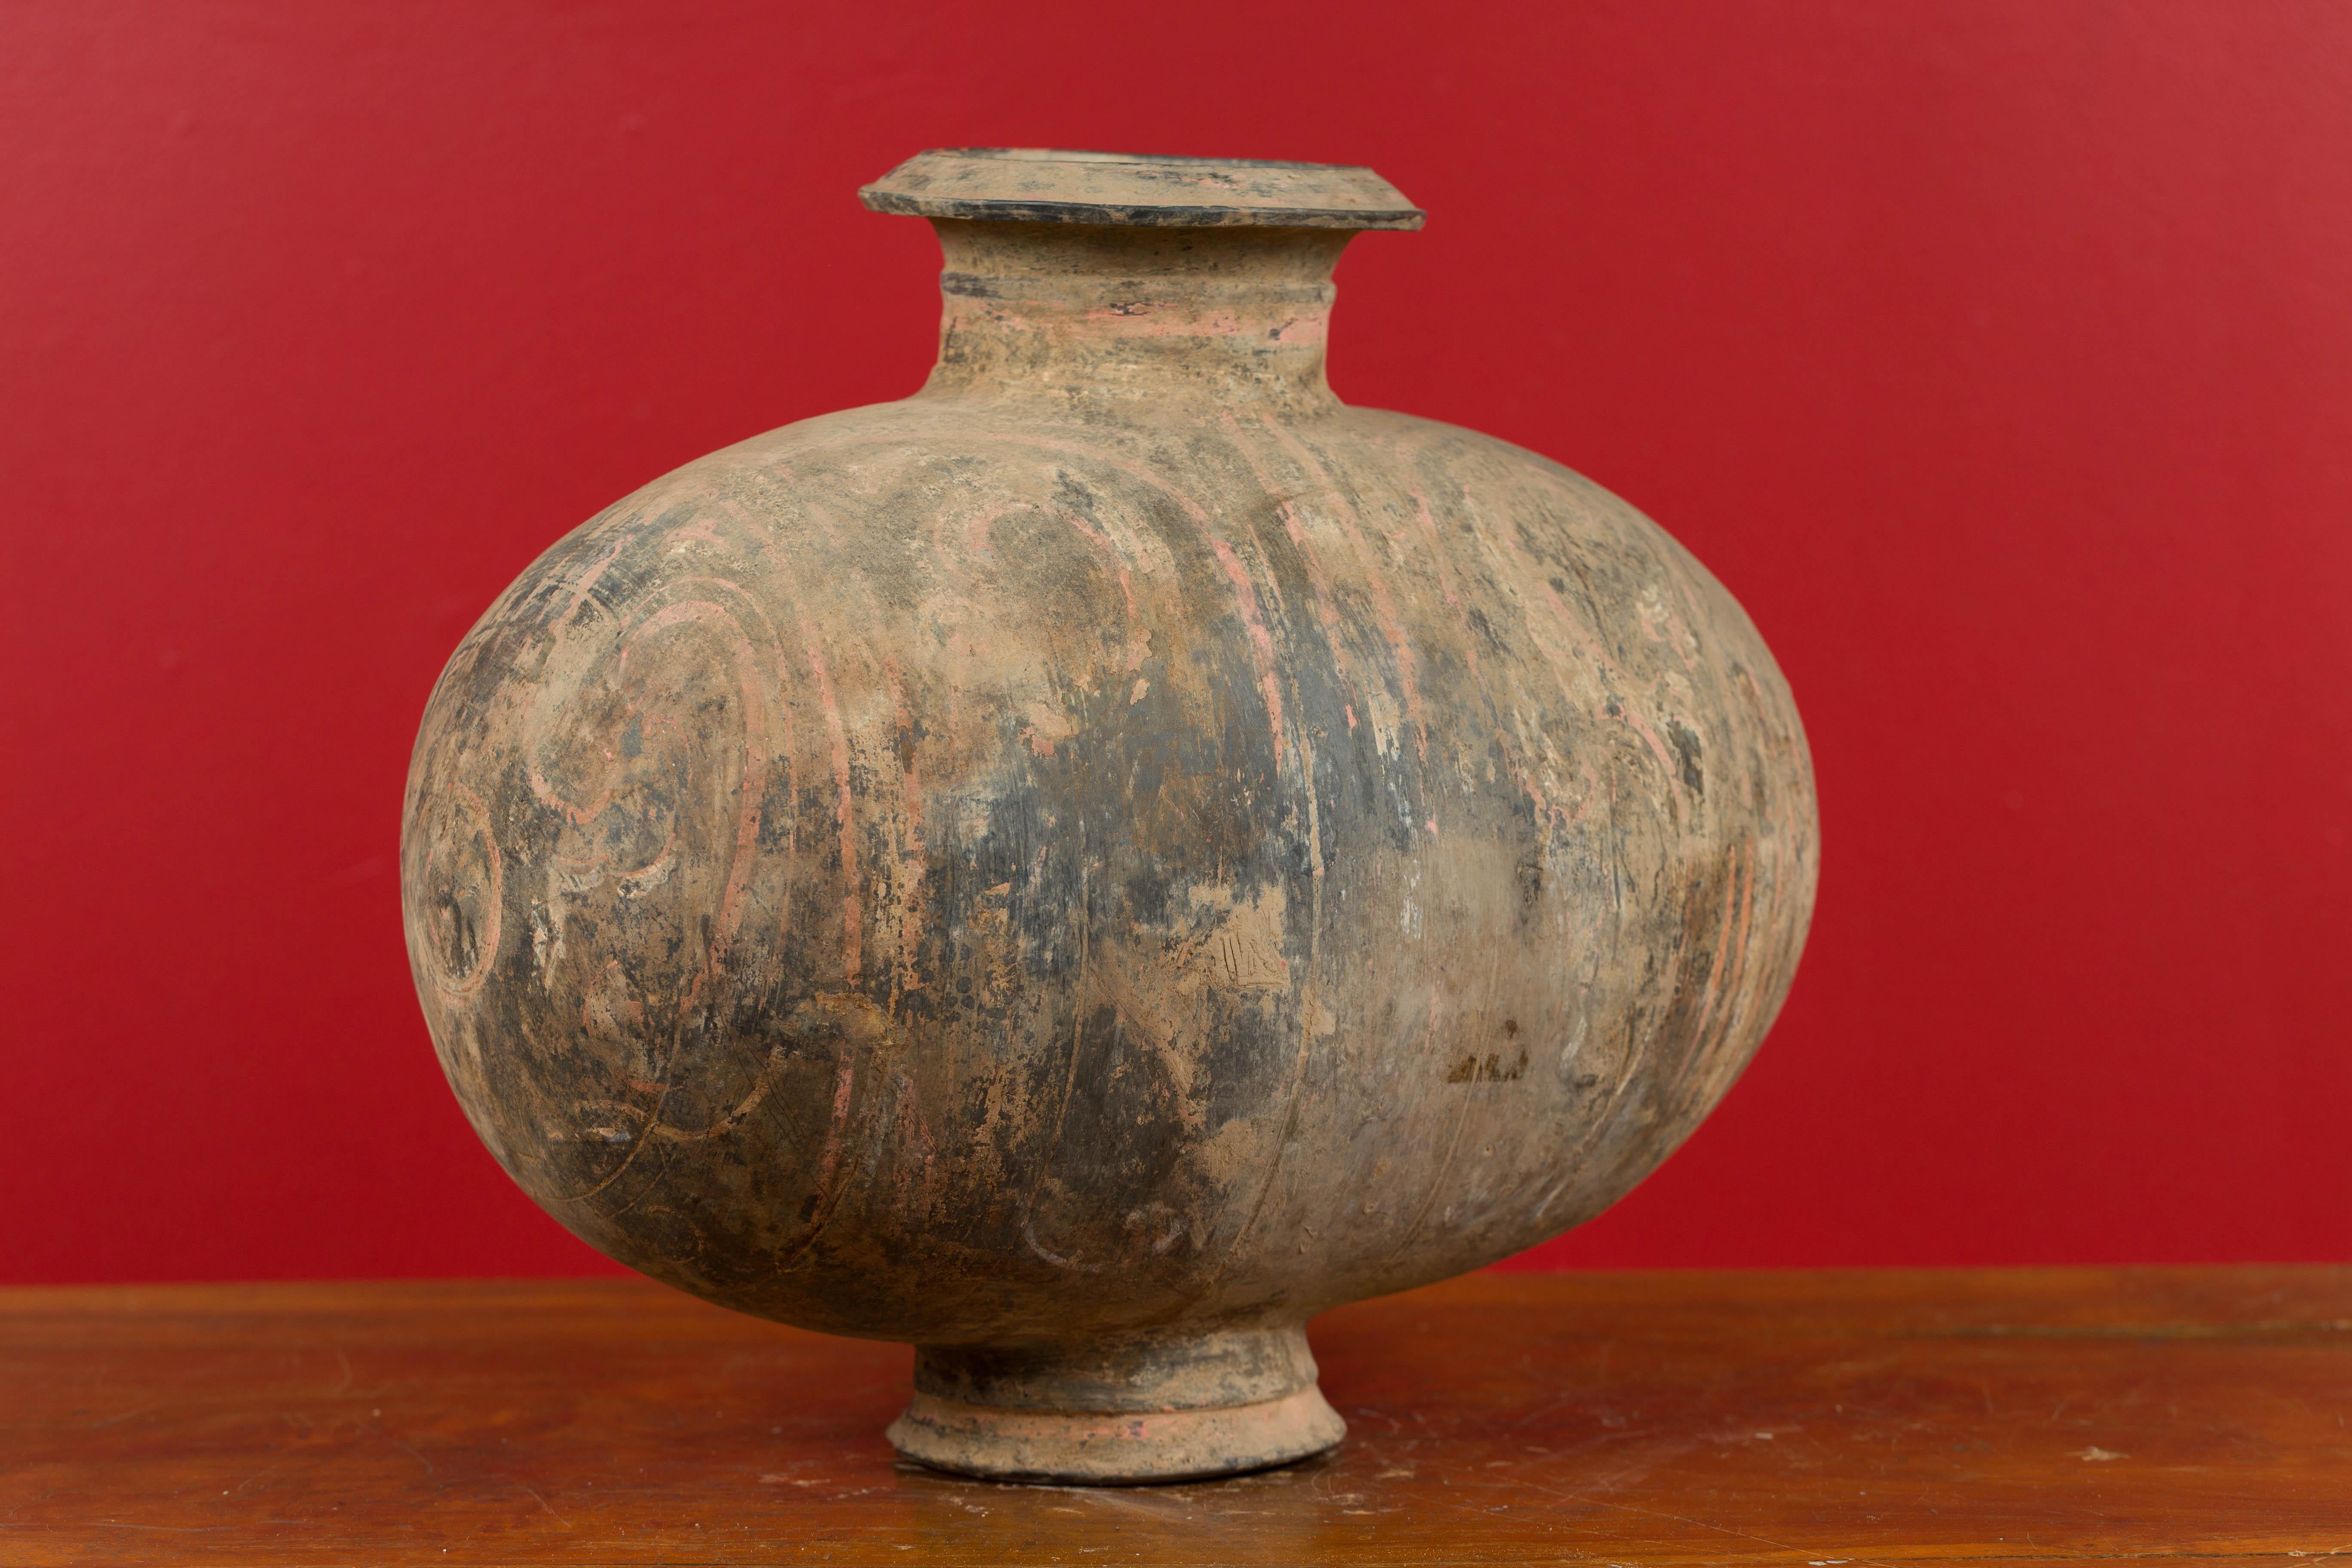 Han Dynasty Earthenware Cocoon Jar with Painted Decor, circa 206 BC-220 AD 6